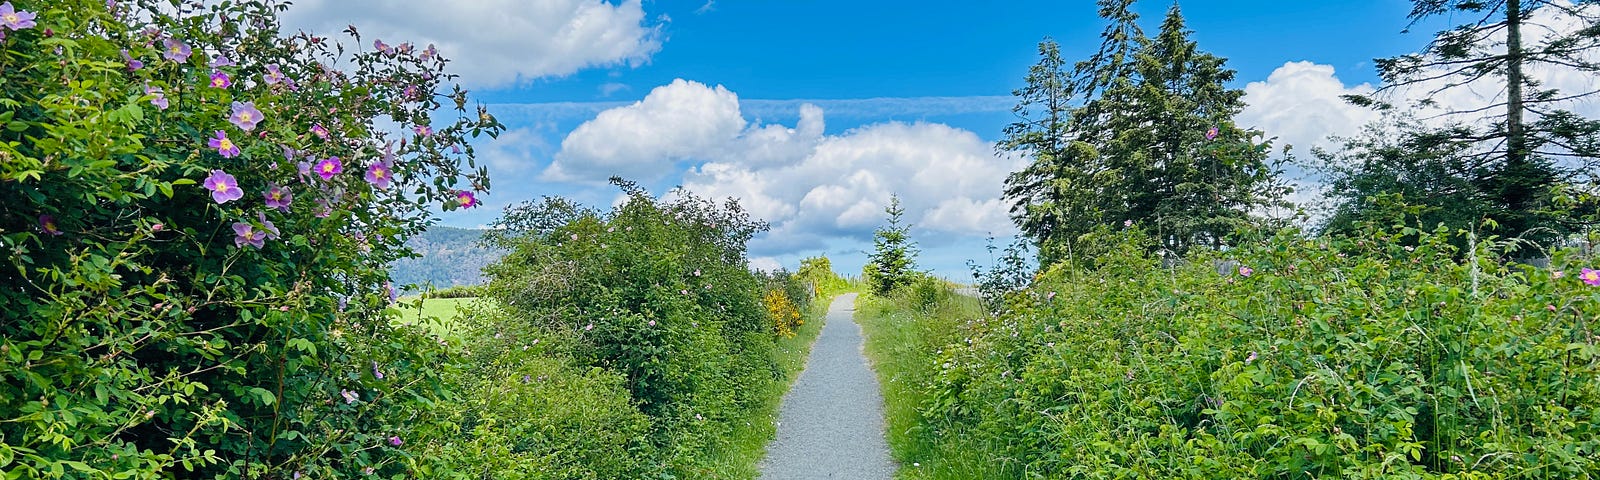 A path leads between two rows of shrubs. A blue sky with white clouds hovers above